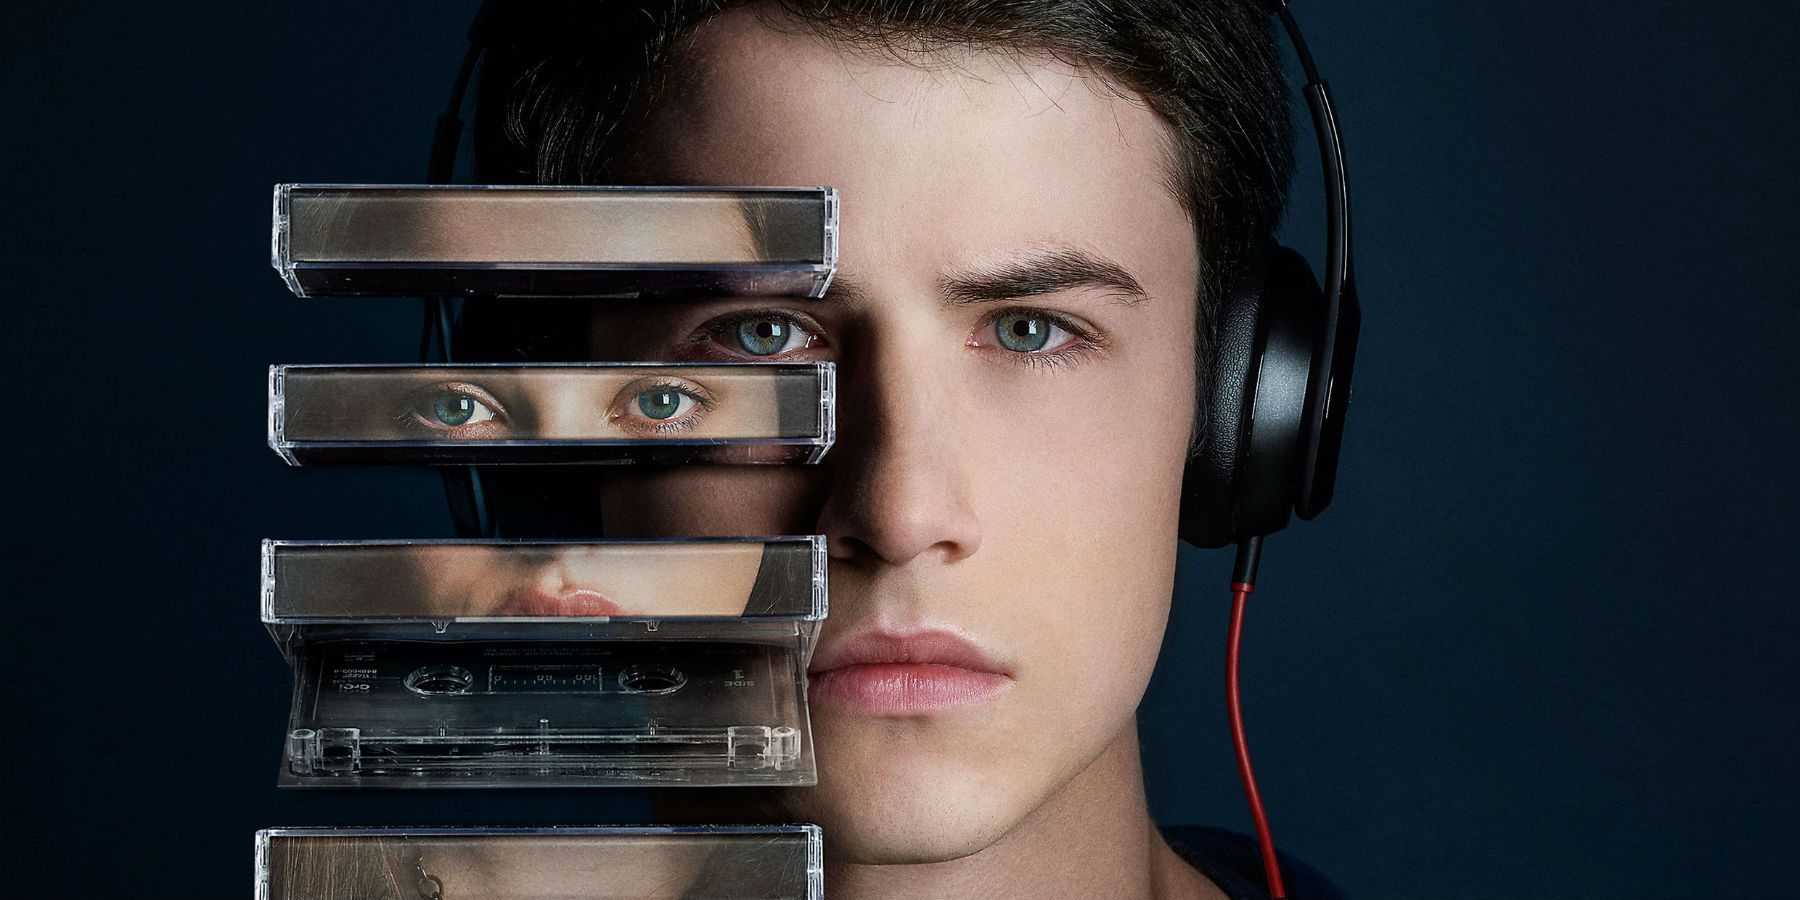 13 reasons why 2 release date netflix